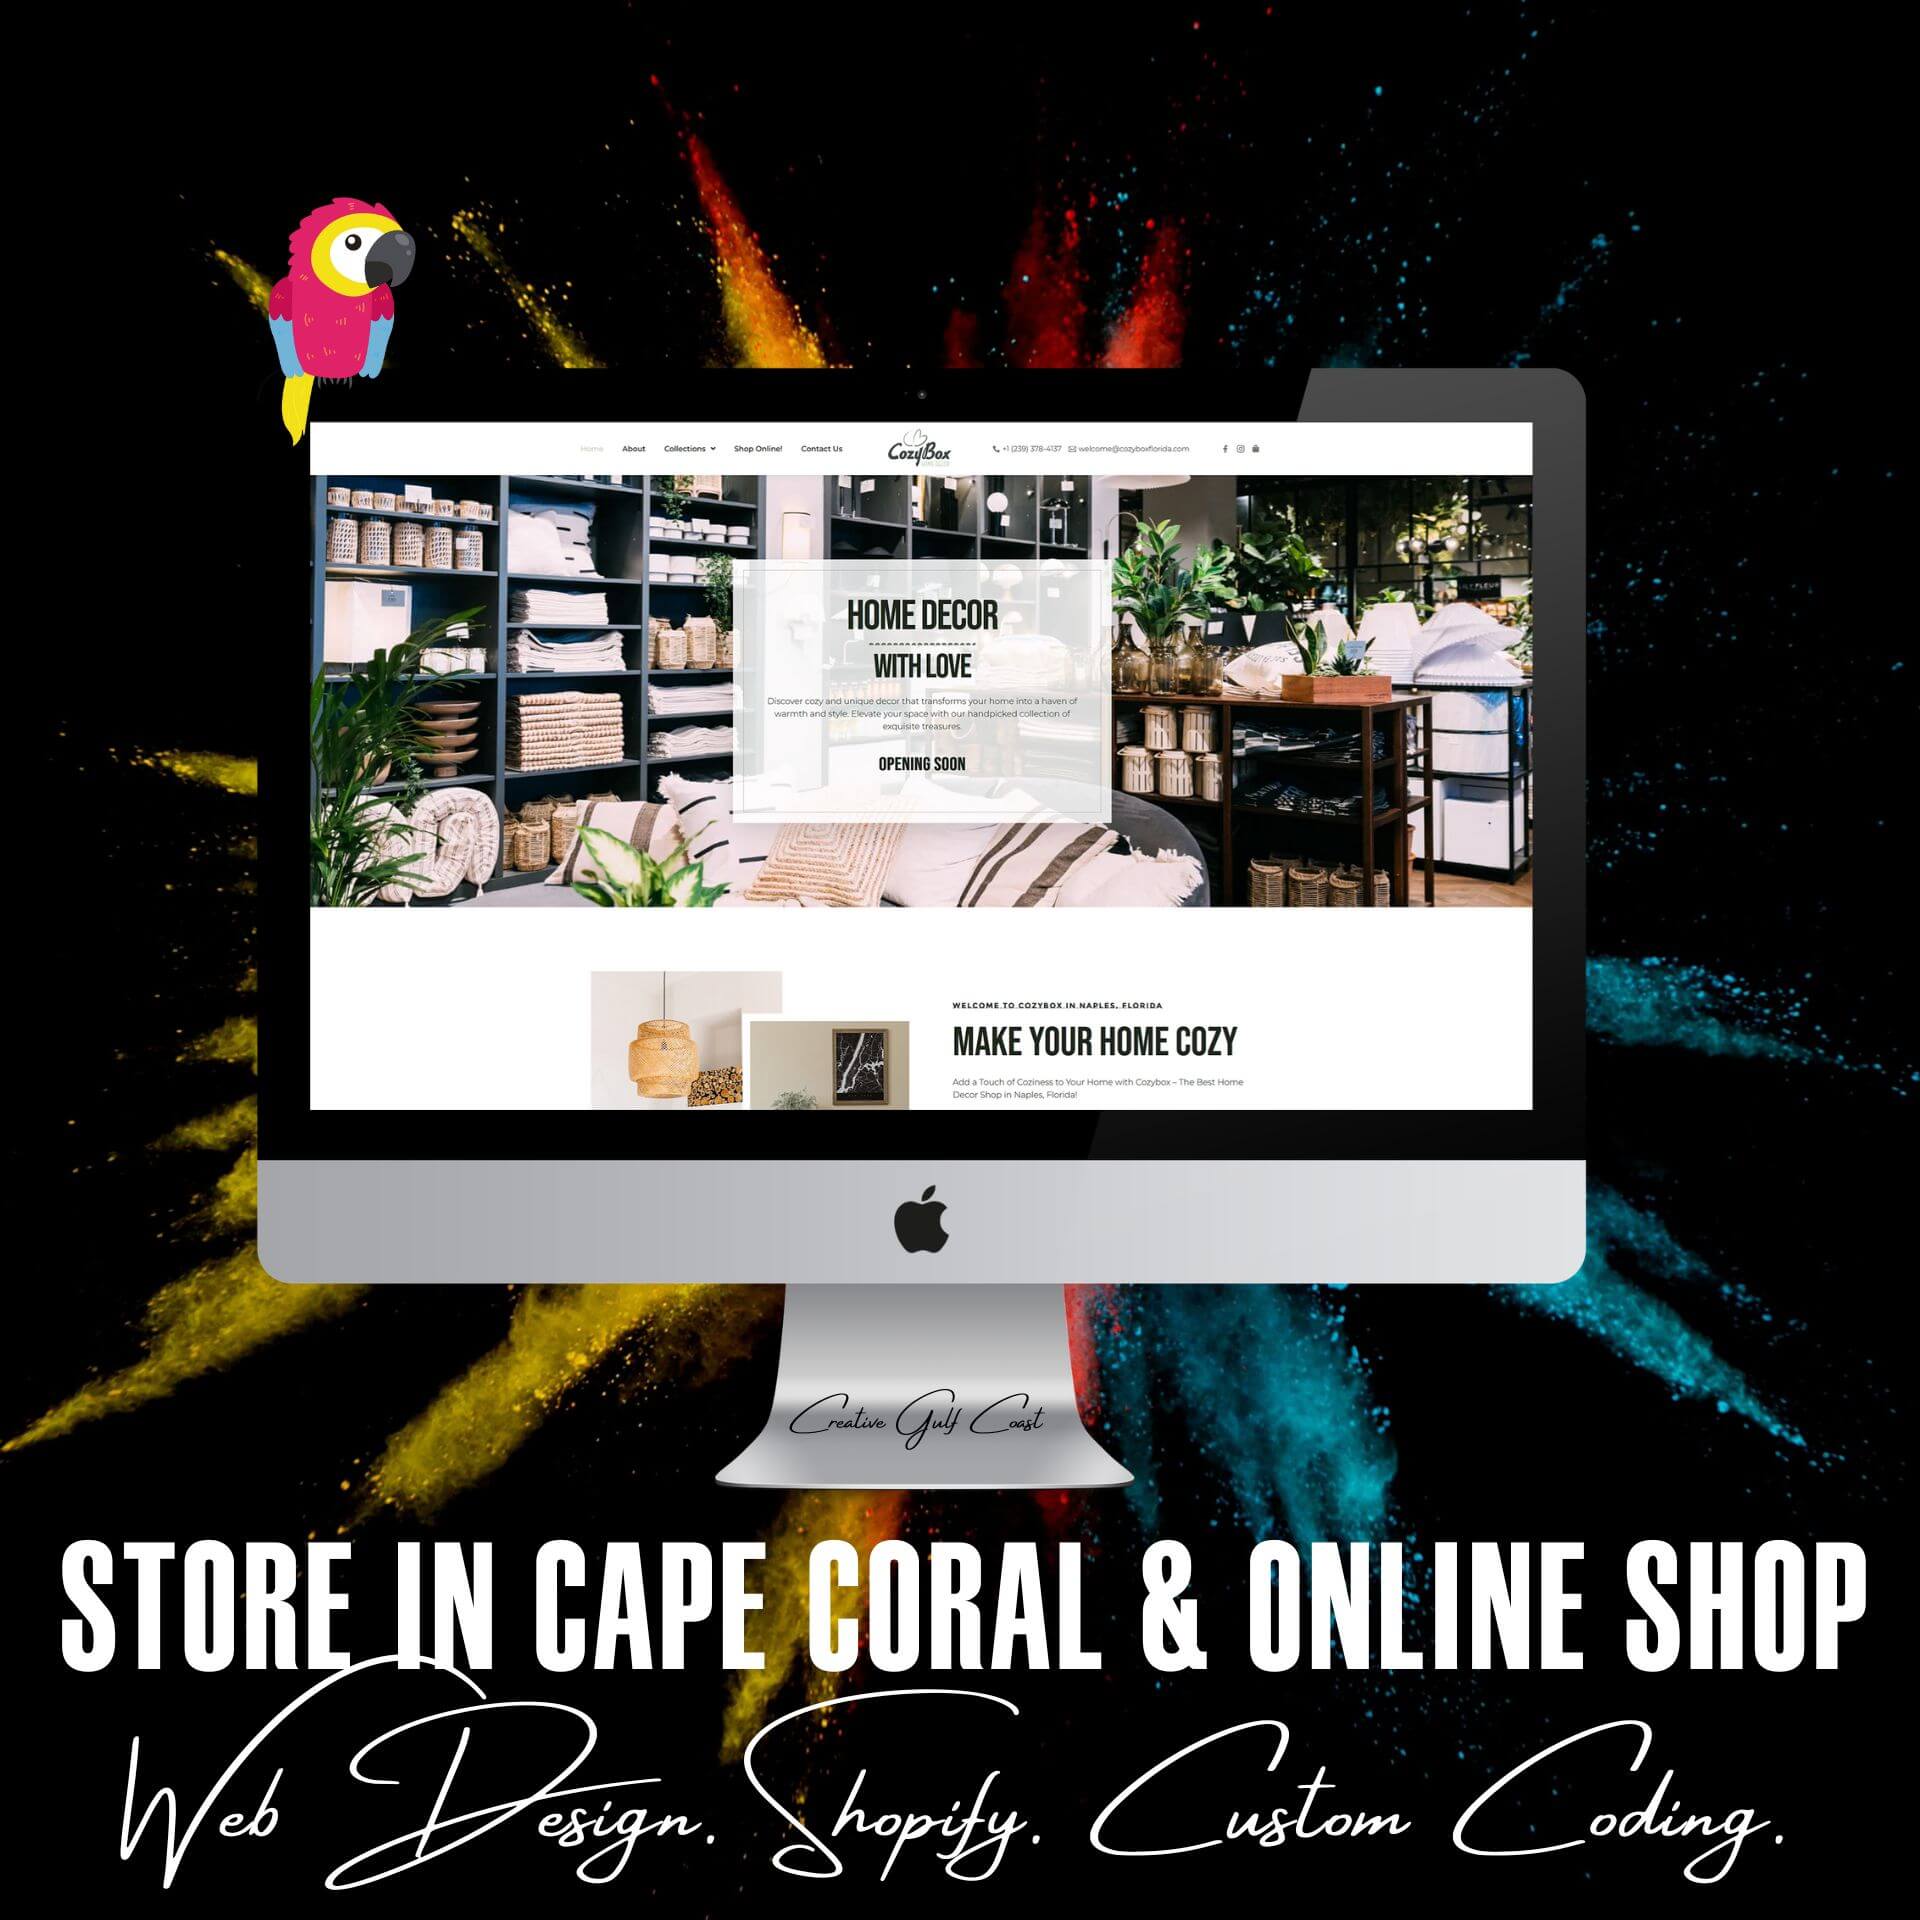 Web Design Florida - Reference Store and Shopify Client in Naples - Creative Gulf Coast Marketing